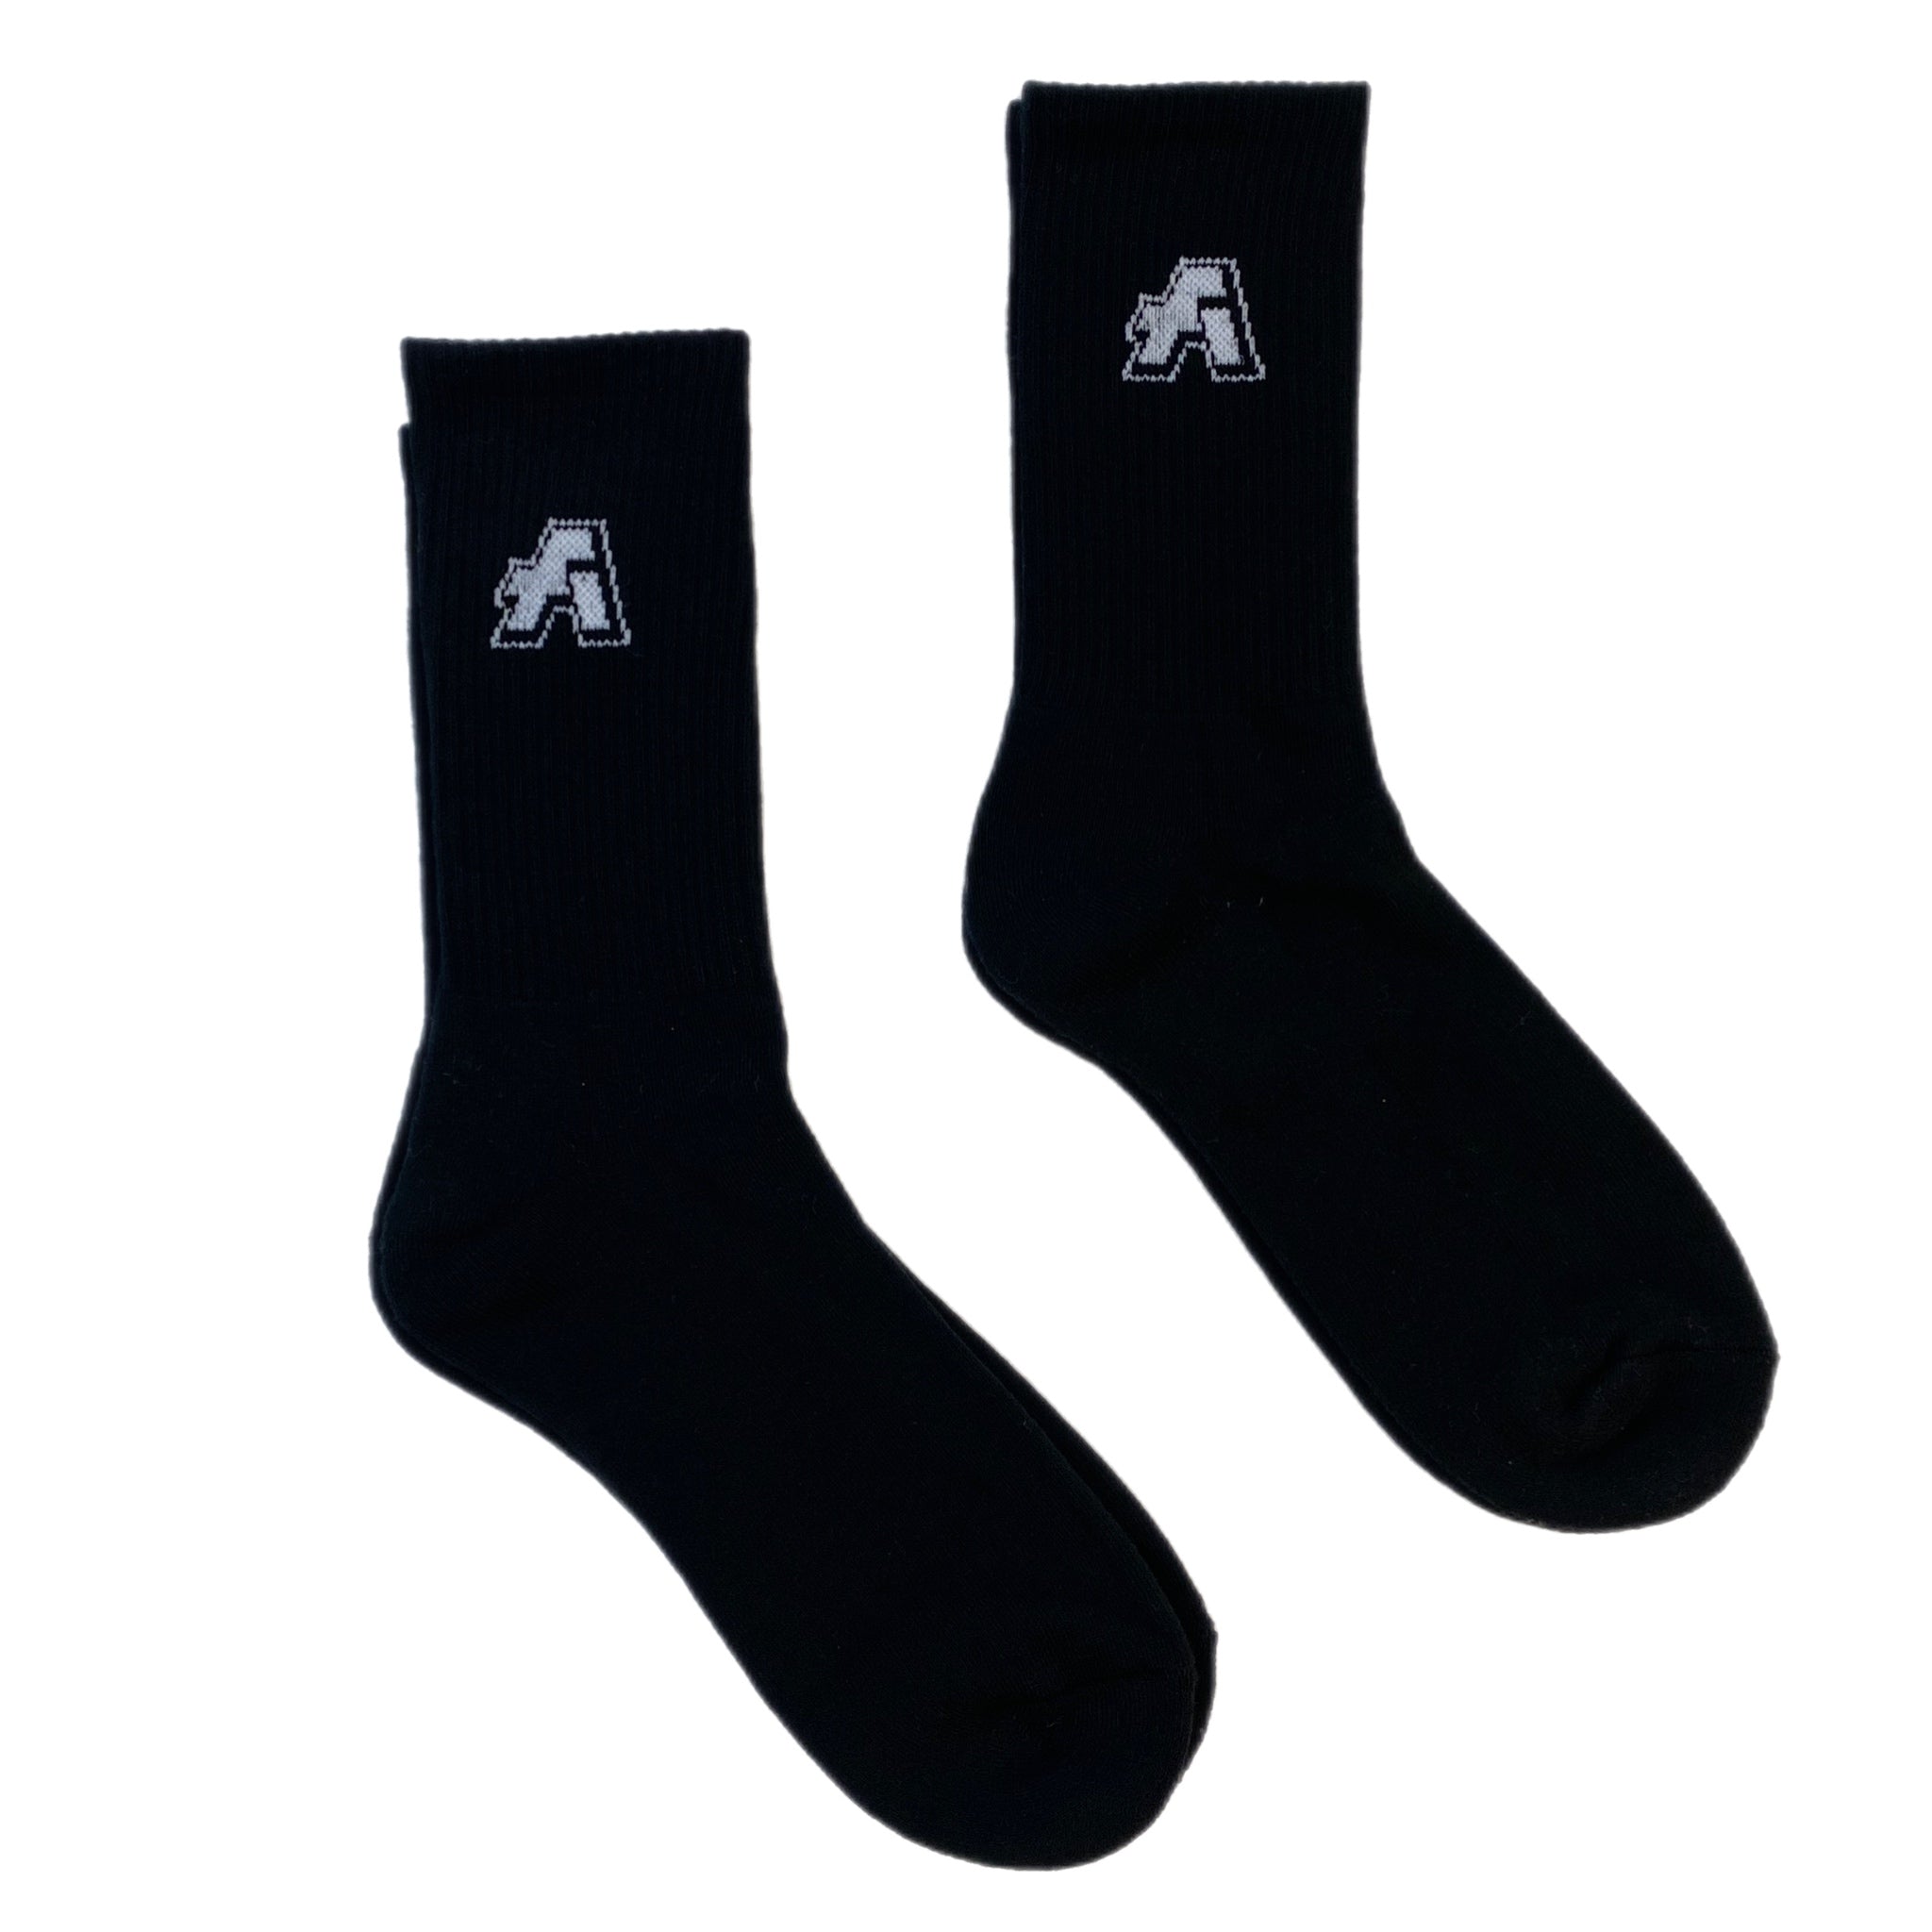 From Another Socks Two Pack Black